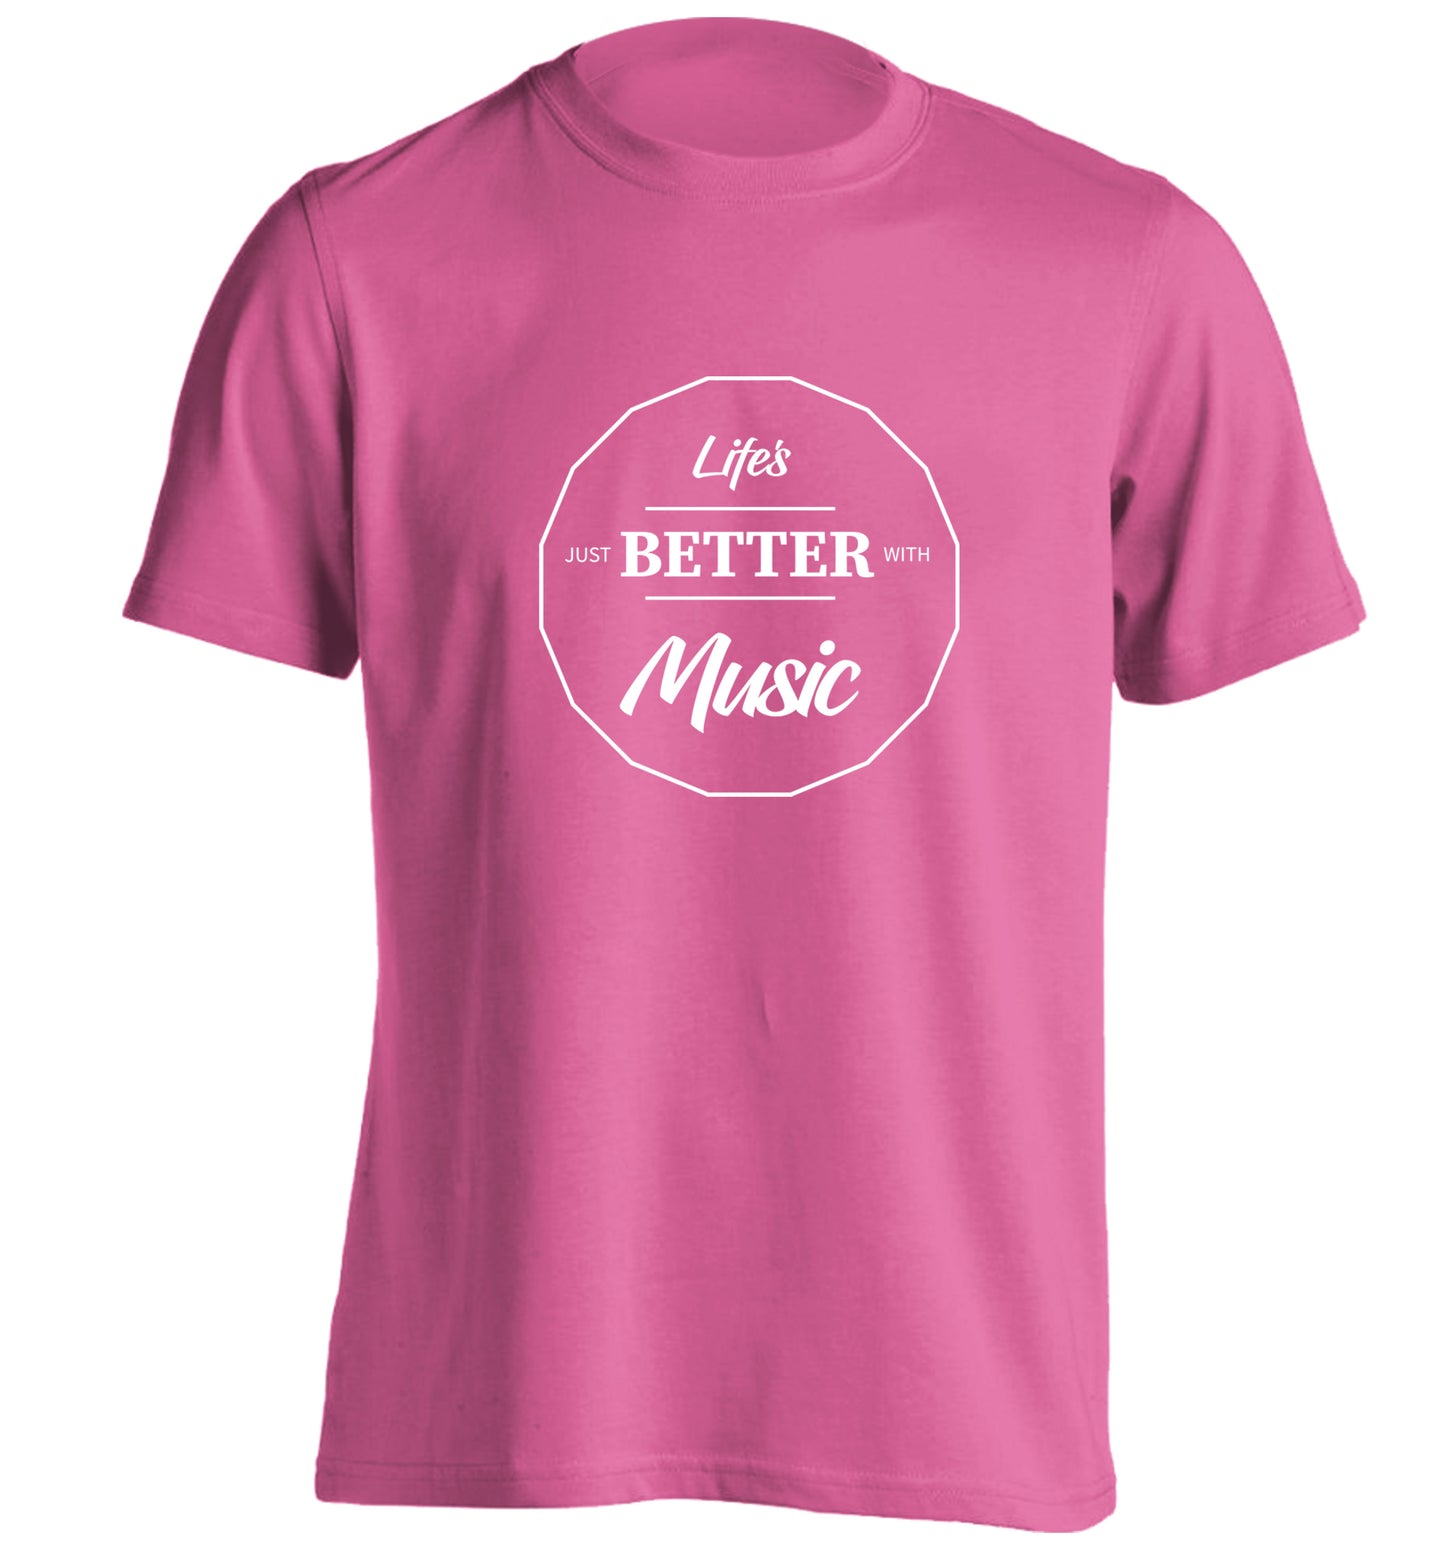 Life is Better With Music adults unisex pink Tshirt 2XL